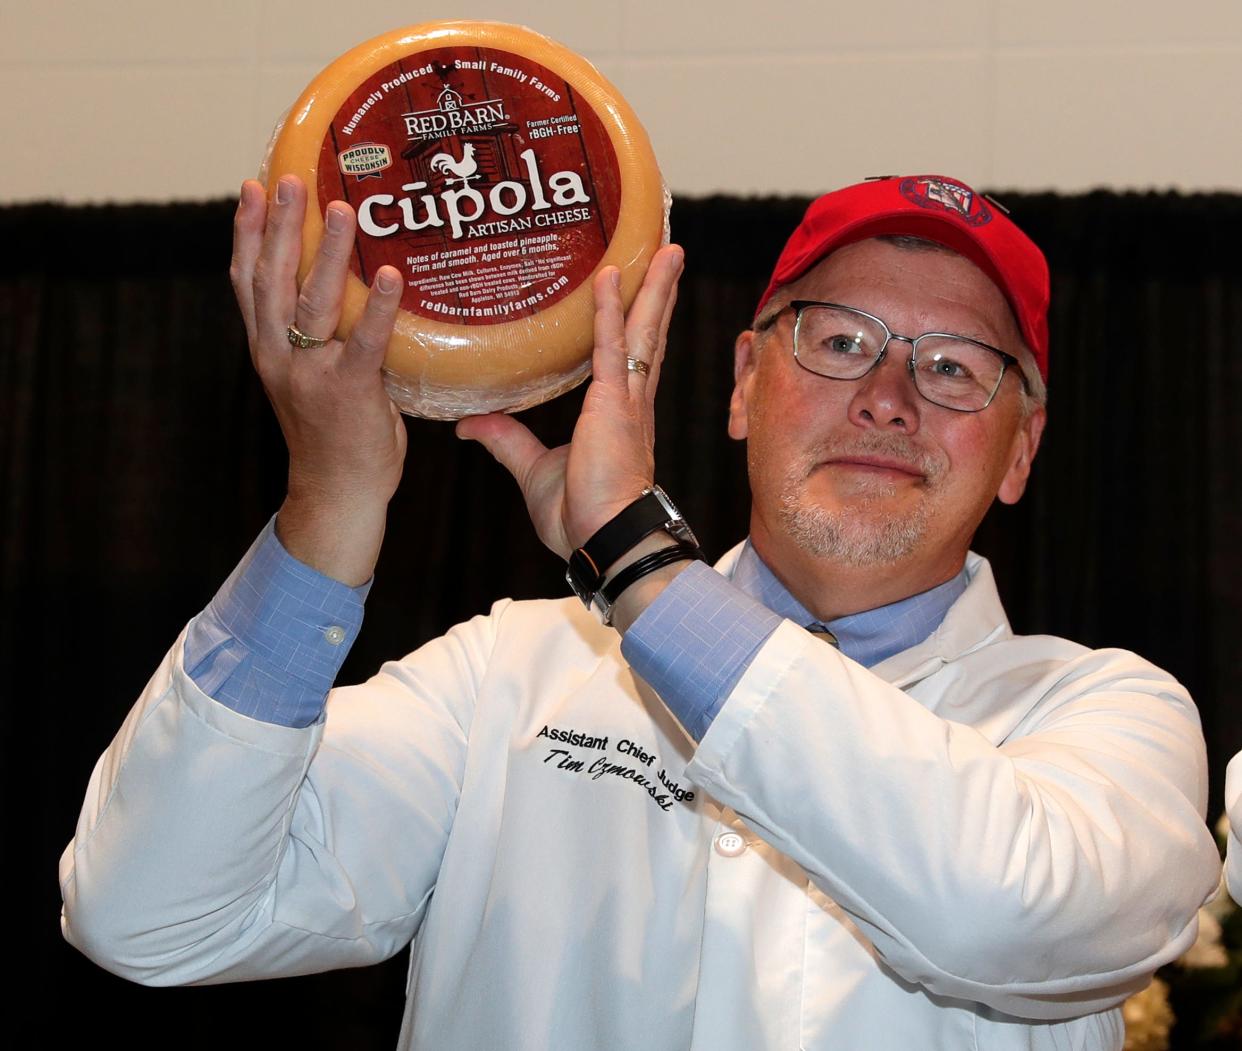 Assistant Chief Judge Tim Czmowski holds up Vintage Cupola American Original Cheese made by Door Artisan Cheese Co. of Egg Harbor for Red Barn Family Farms in Appleton. The cheese took second place overall during the U.S. Championship Cheese Contest on Feb. 23, 2023, at the Resch Expo in Ashwaubenon, Wis.